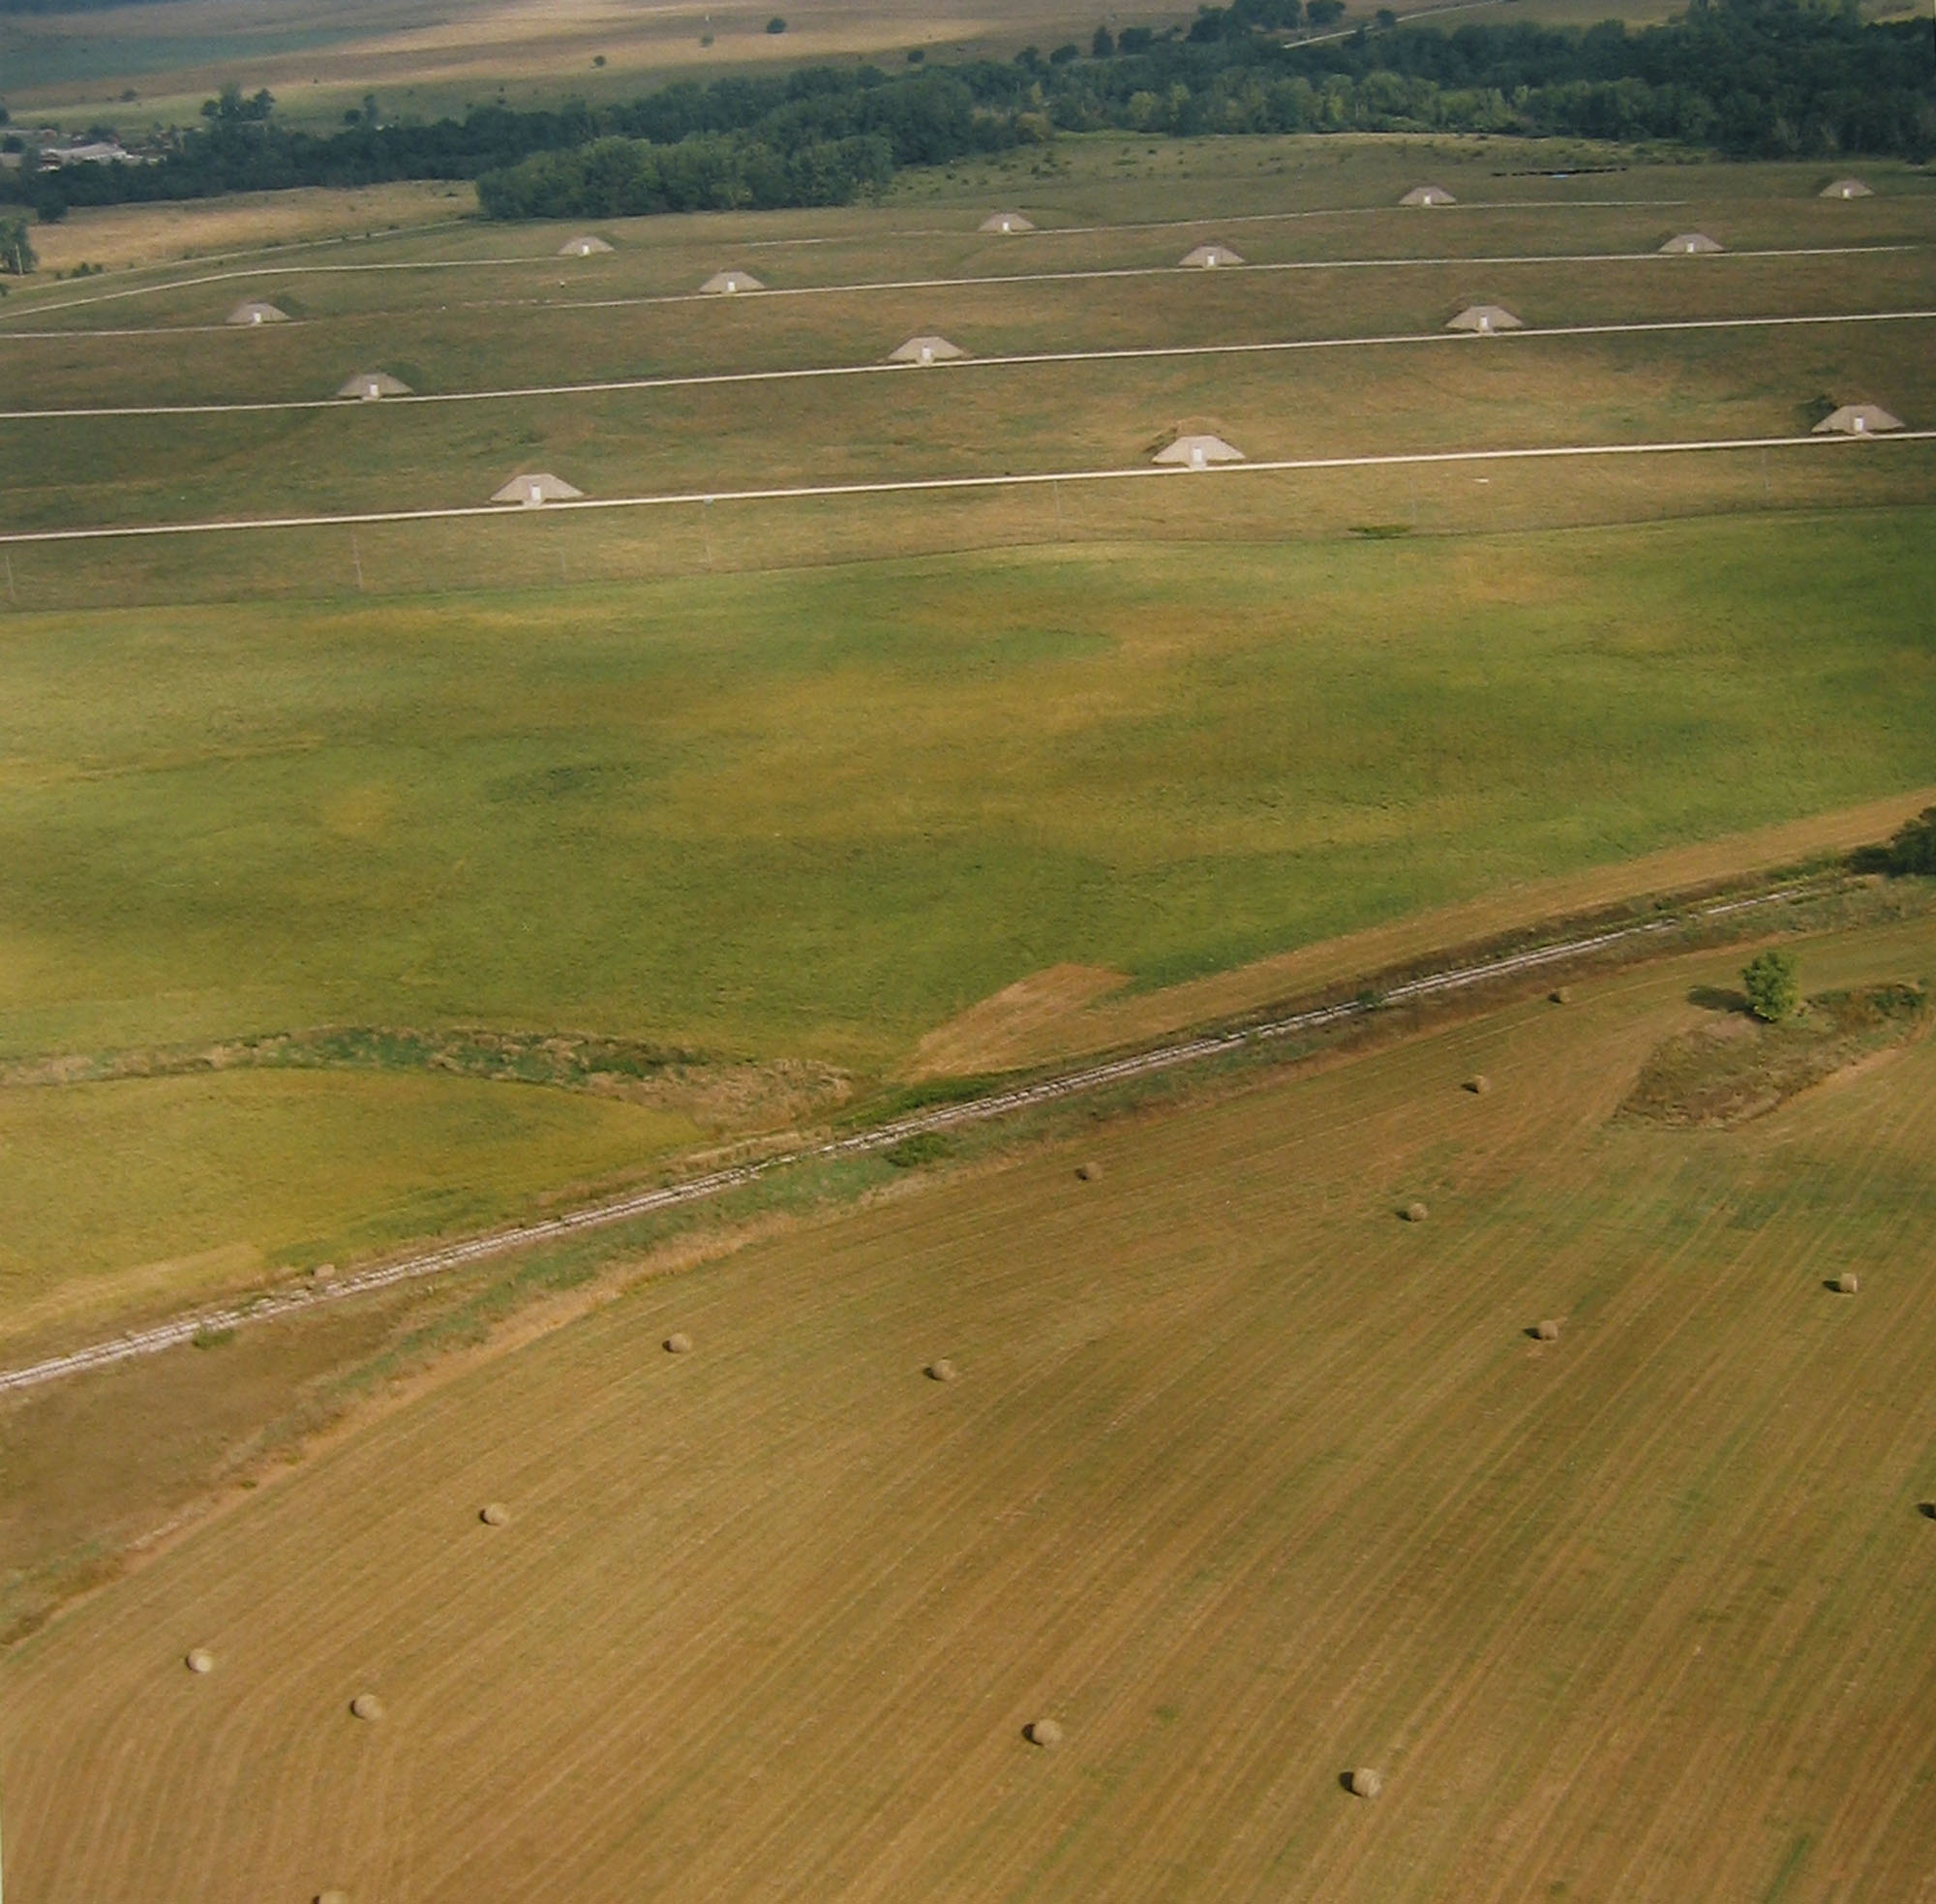 Ammunition storage bunkers and hay bales, September 9, 1995